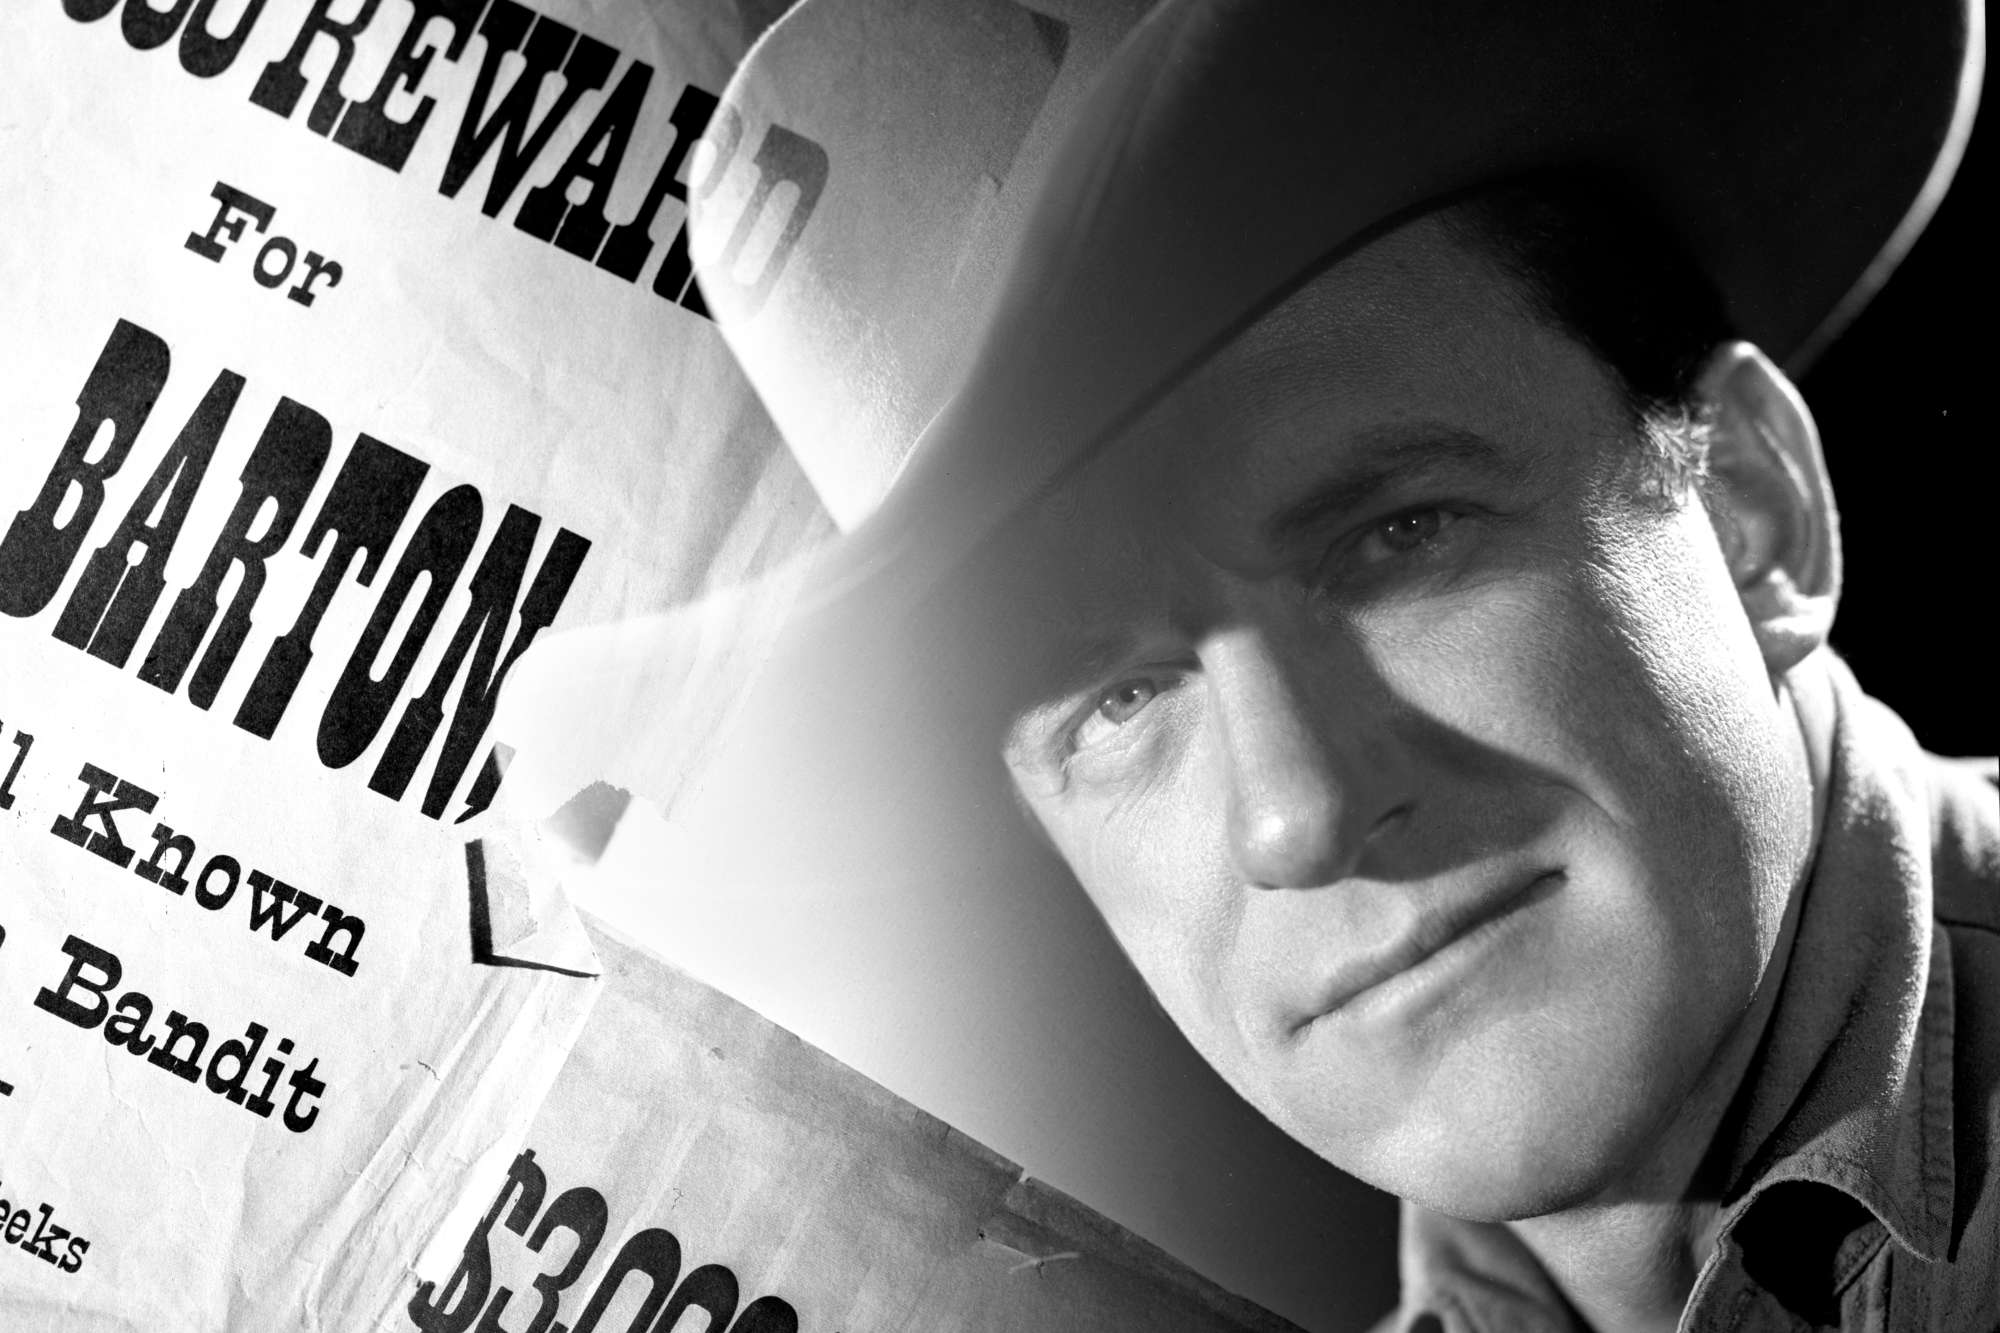 'Gunsmoke' James Arness as Matt Dillon wearing a cowboy hat with a wanted poster faded in the background.